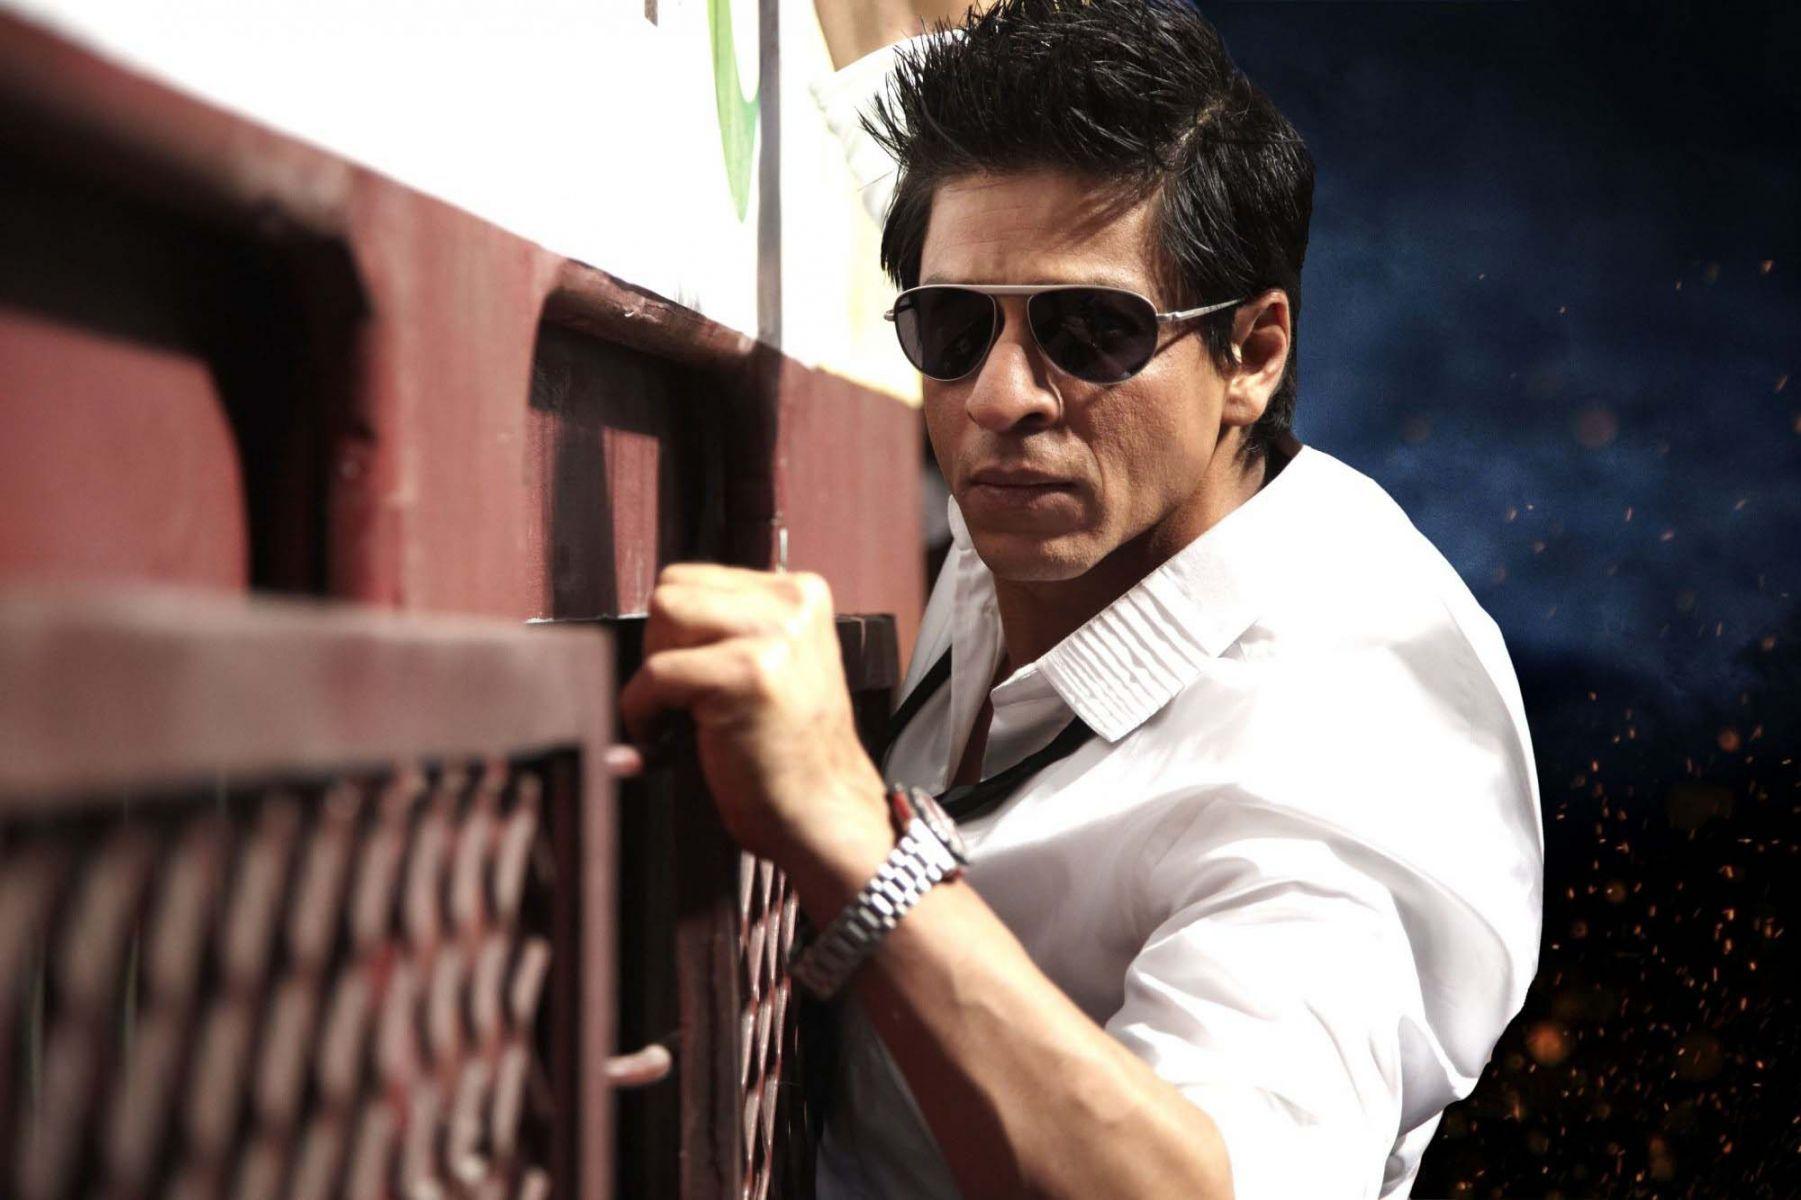 Shahrukh Khan In Action. HD Bollywood Actors Wallpaper for Mobile